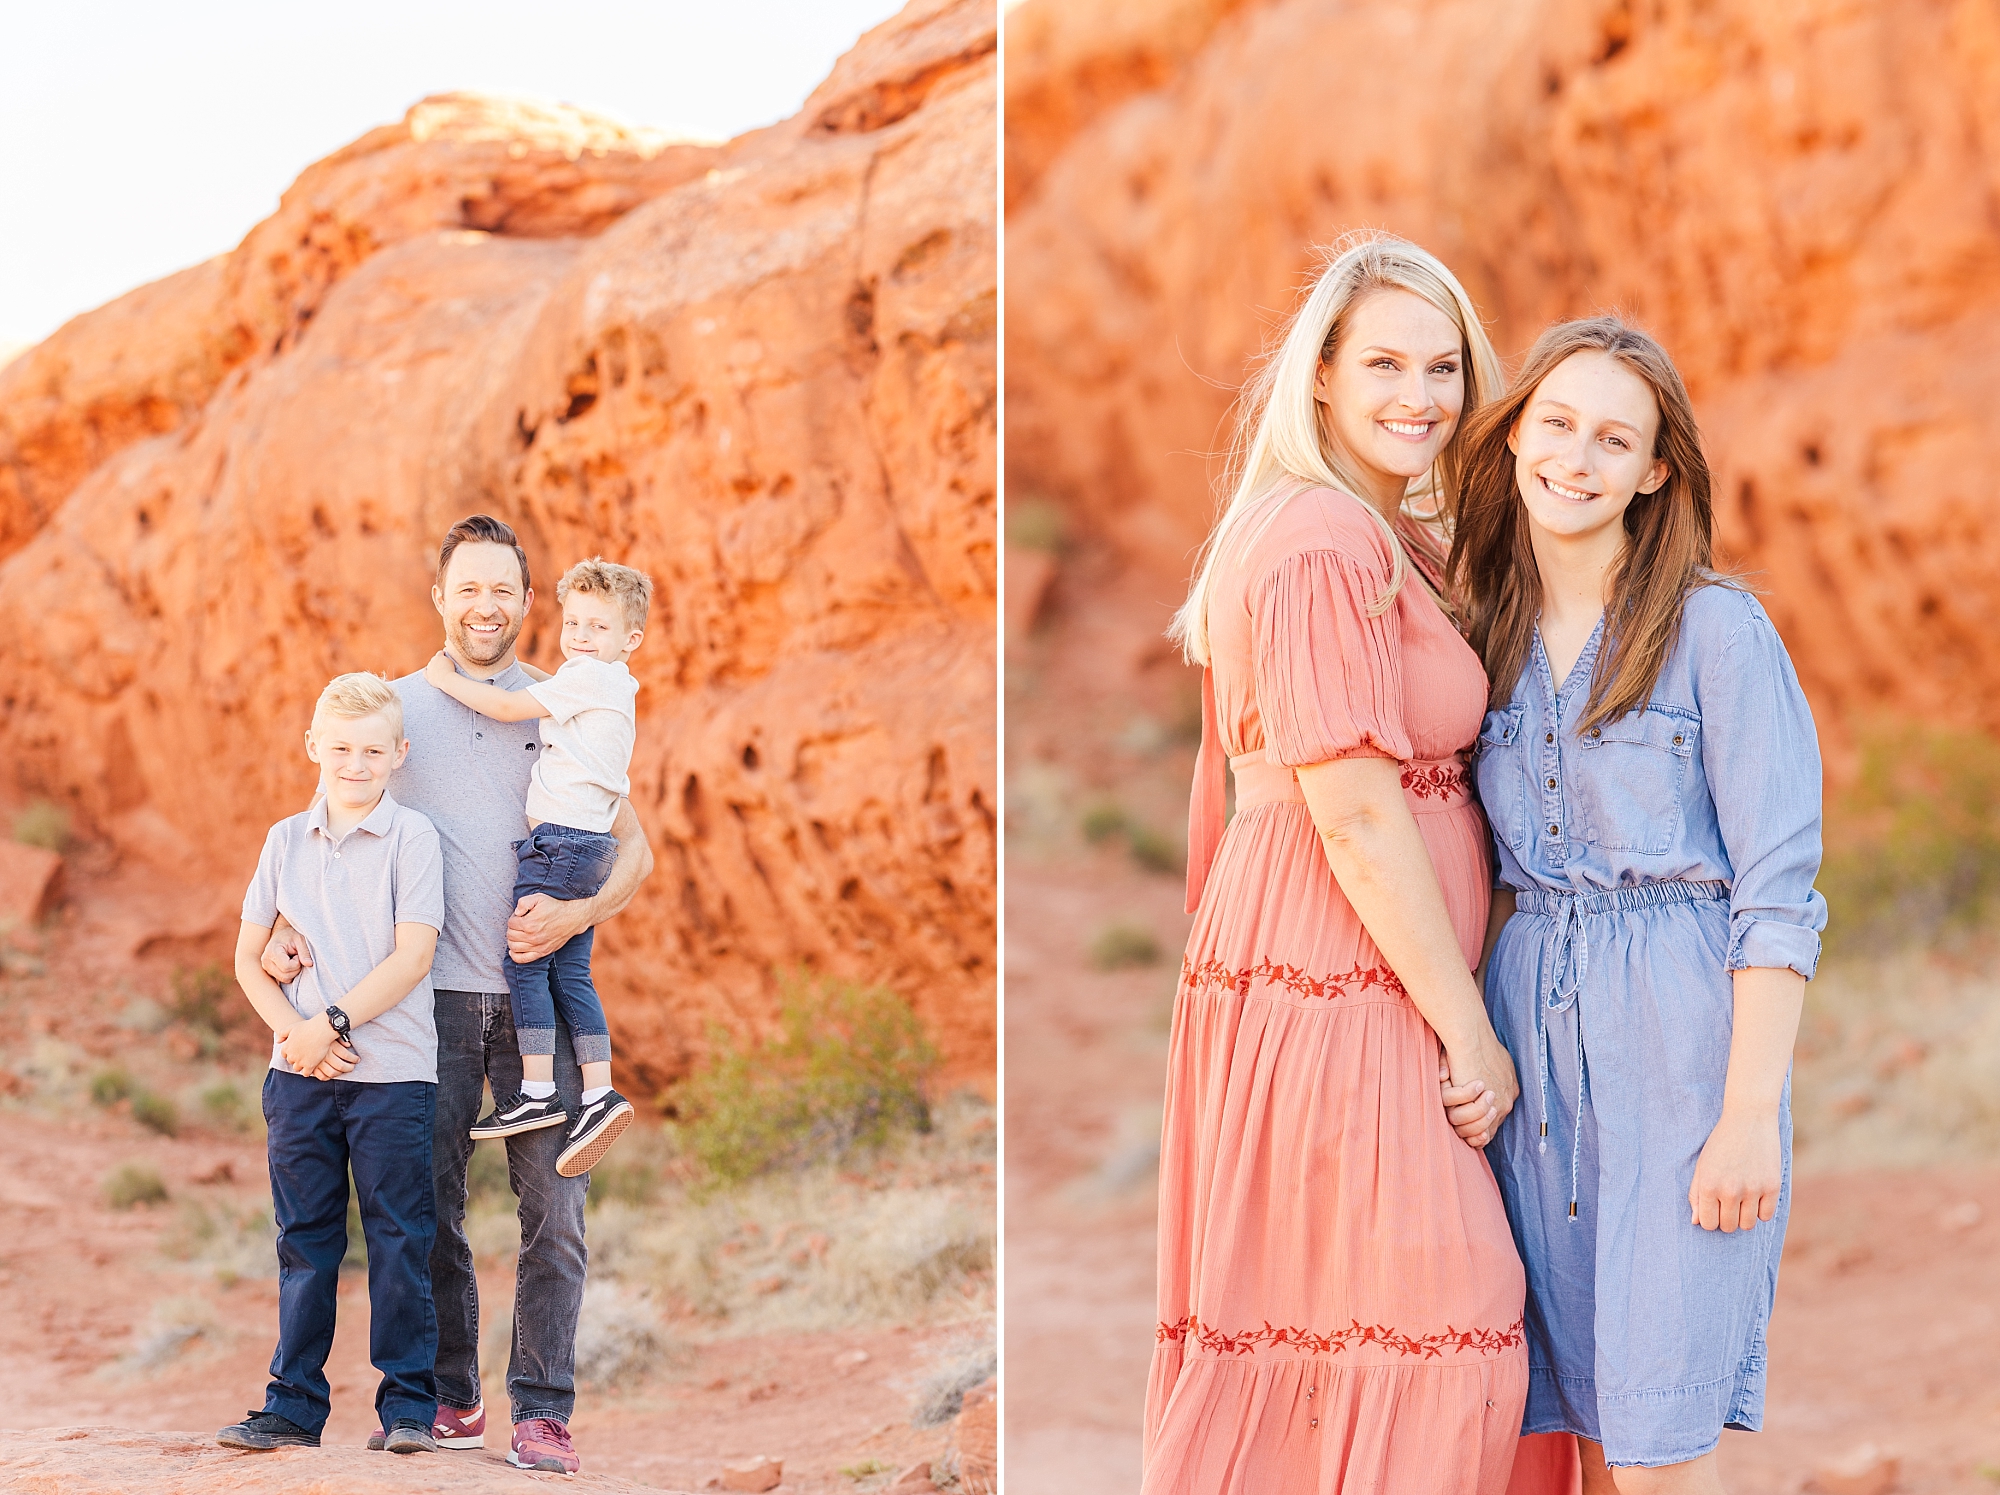 Your family vacation to Southern Utah